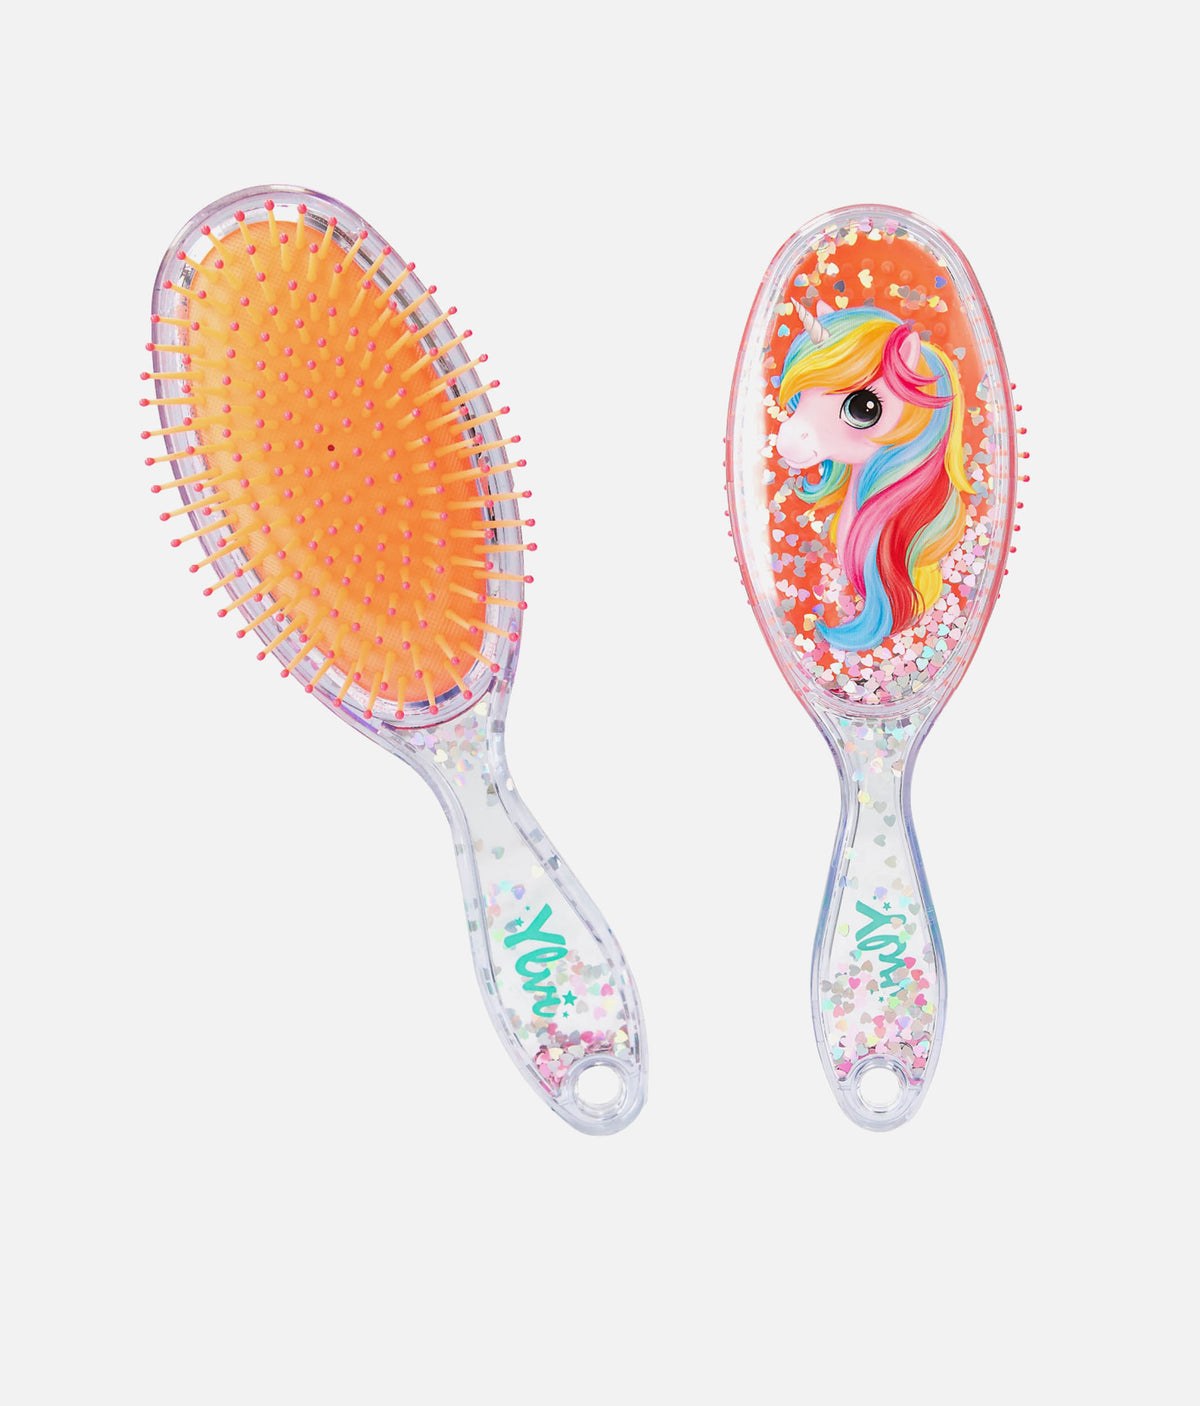 Hairbrush With Confetti - 0012283